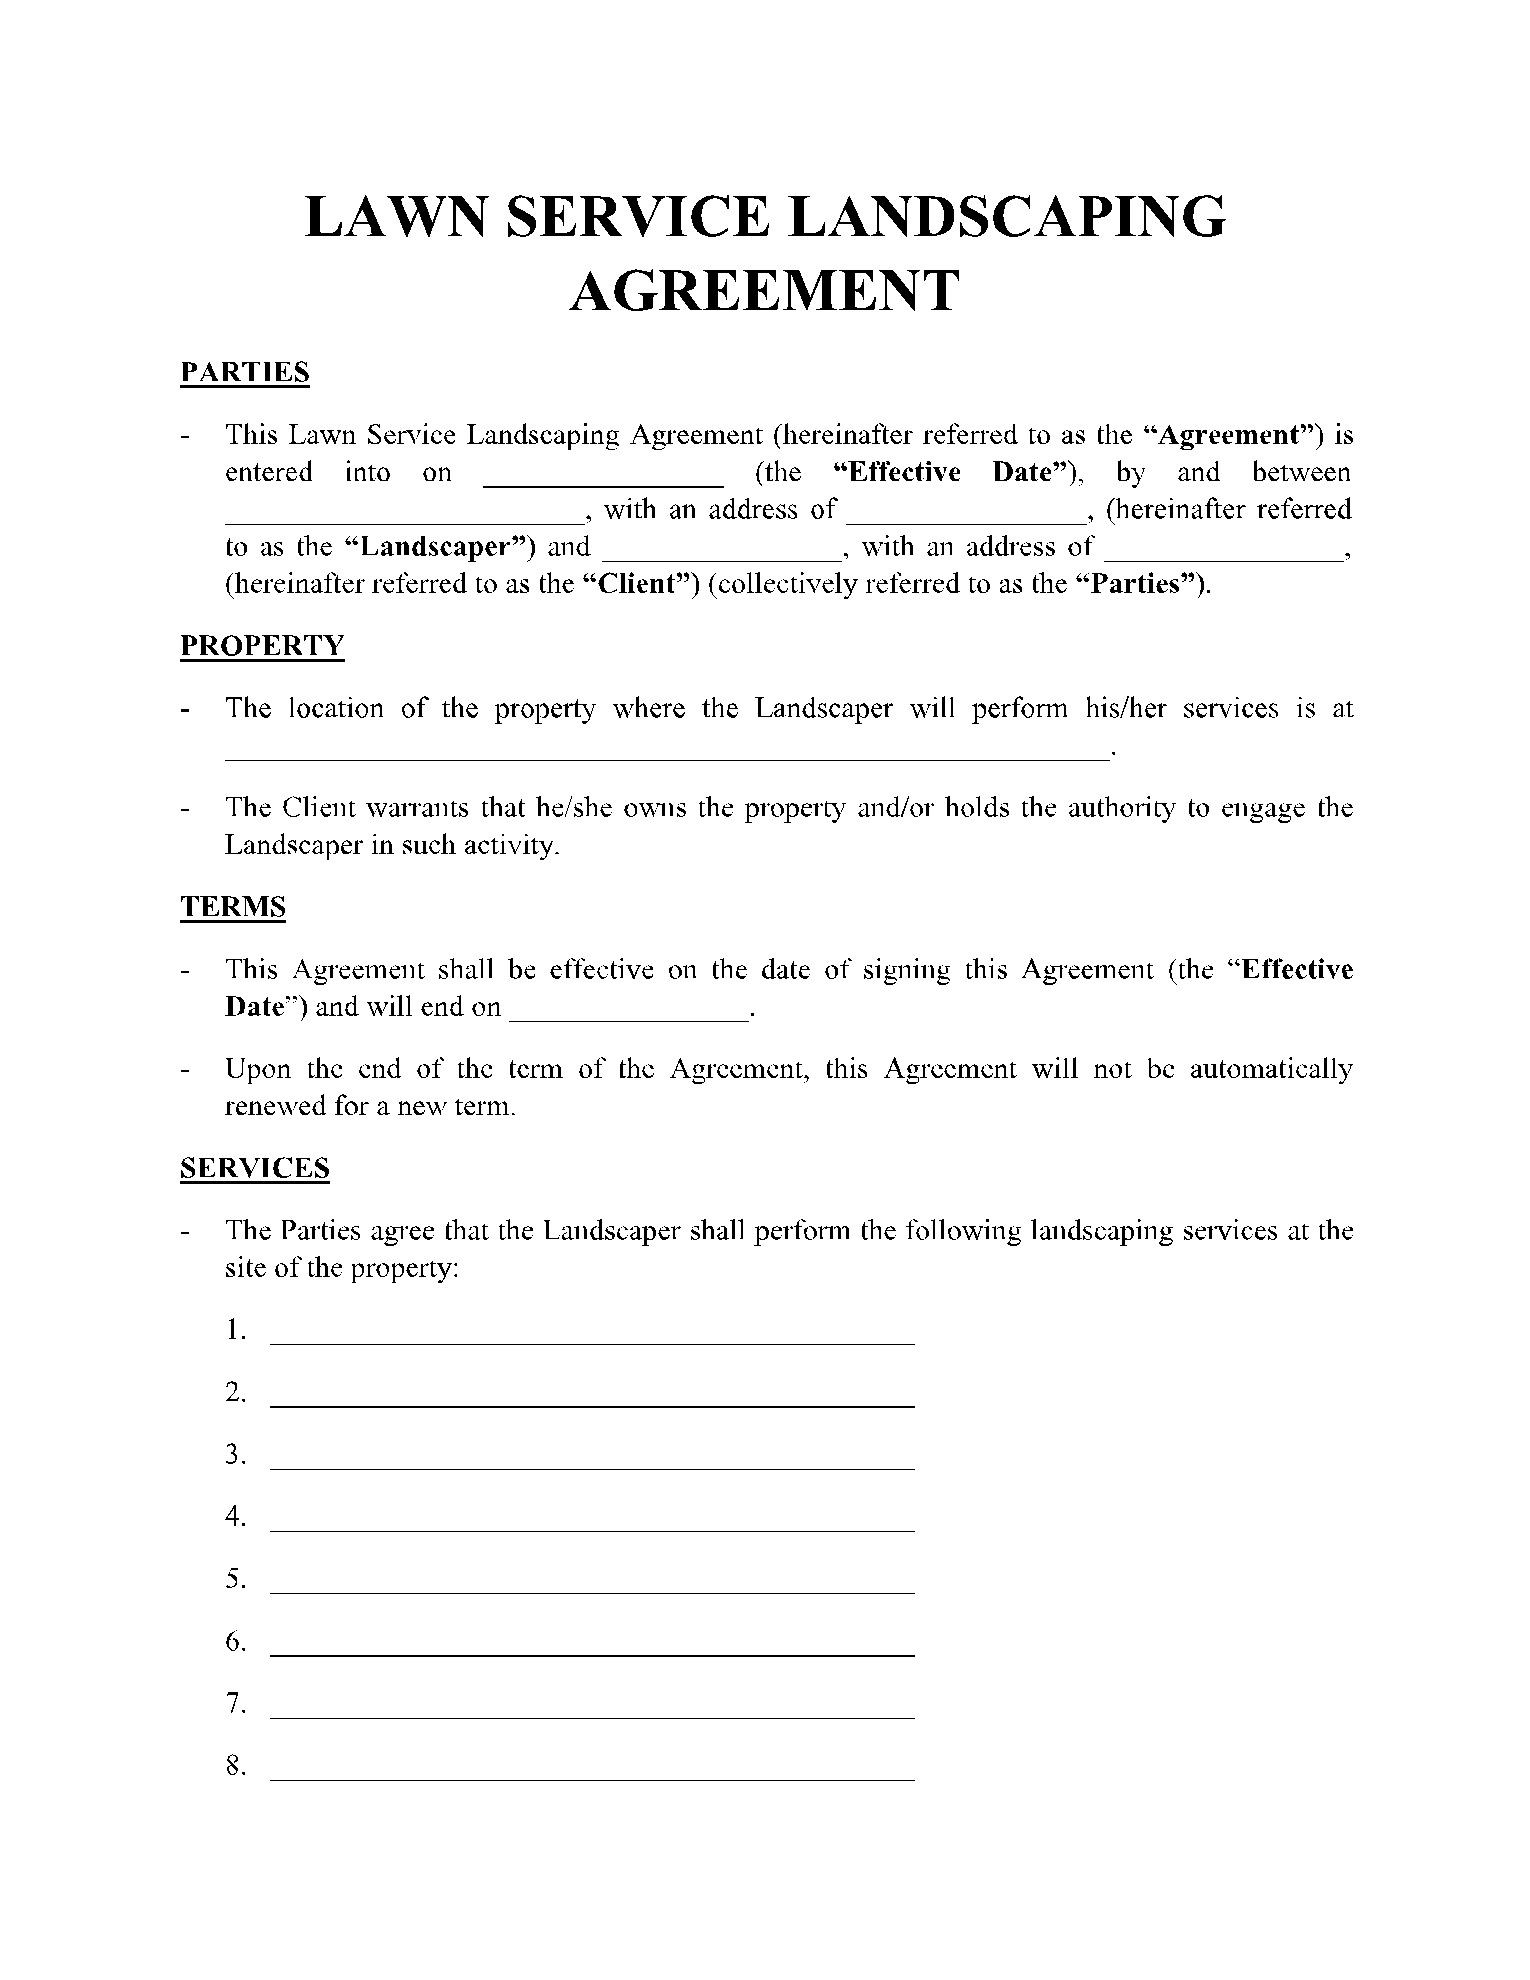 Landscaping Proposal Template